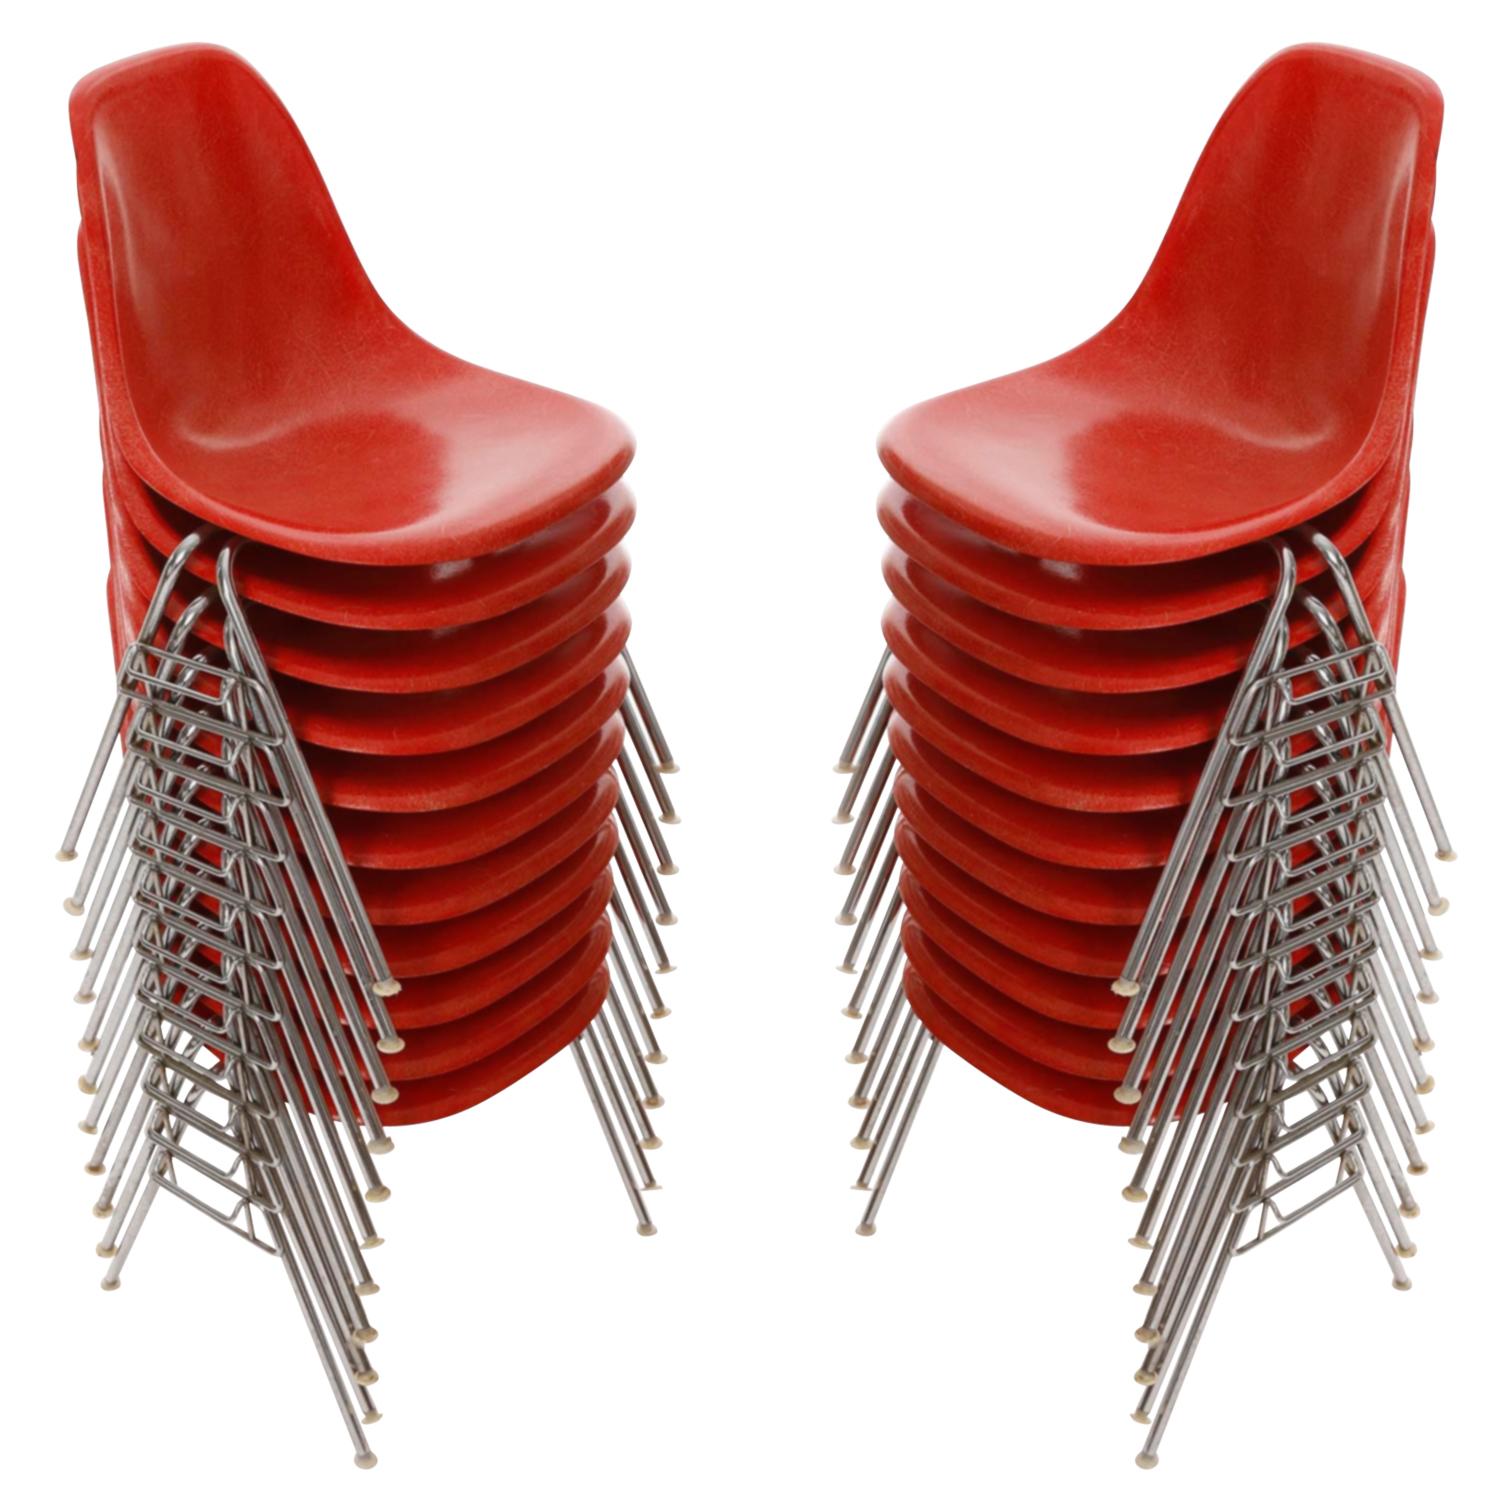 Six chaises empilables Charles & Ray Eames, Herman Miller, Red Fiberglass, 1974. en vente 1